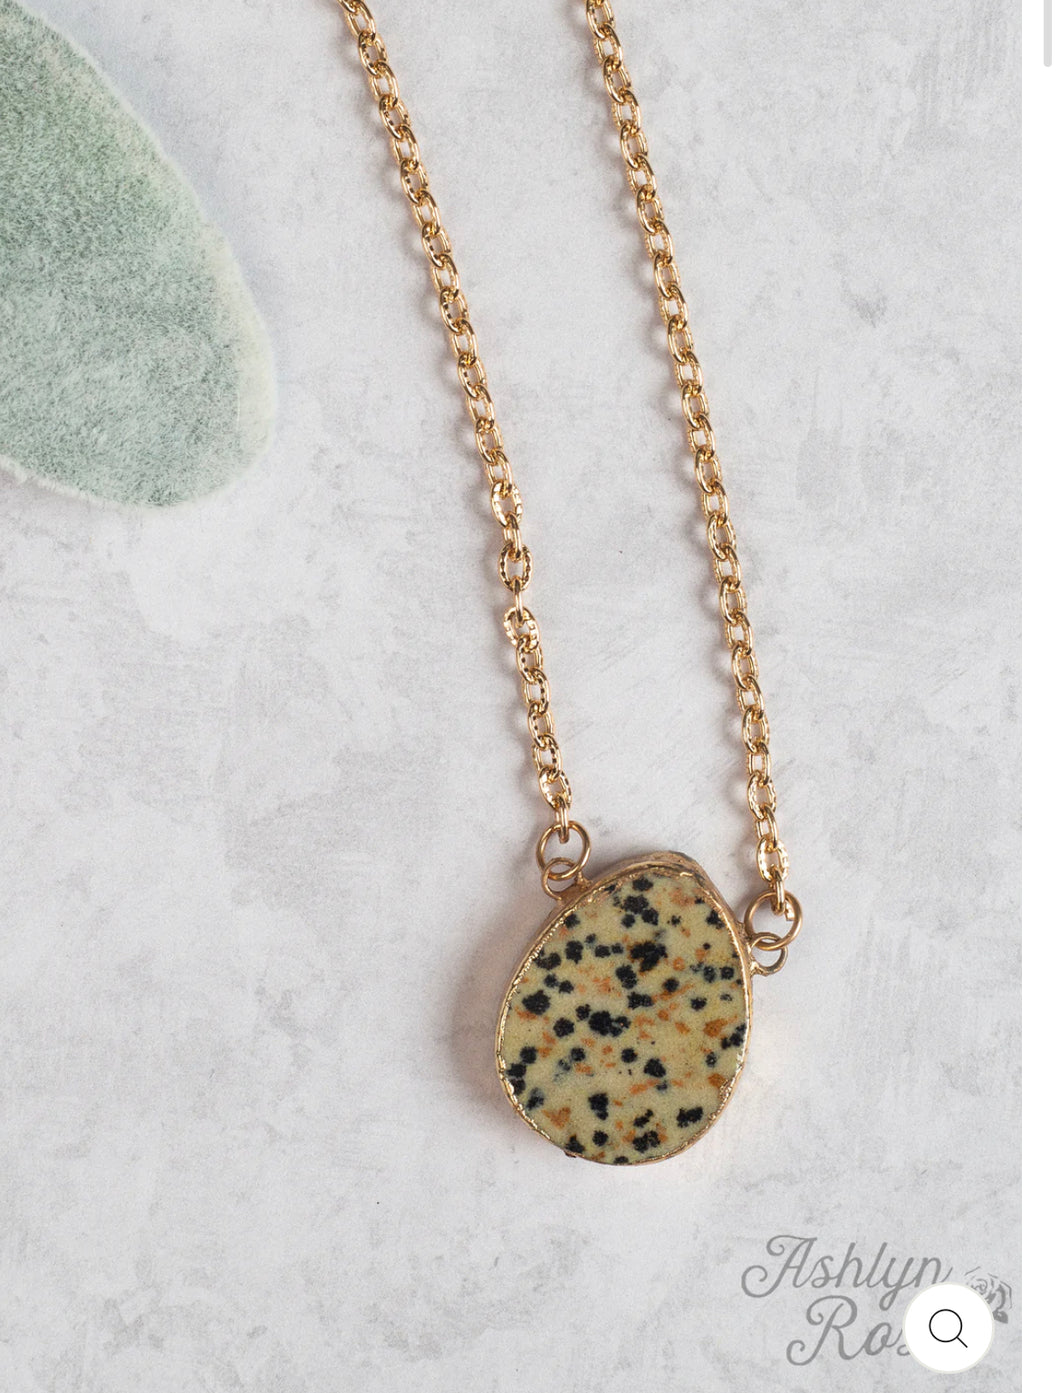 SPOTTED YOU GOLD CHAIN NECKLACE WITH NATURAL GEM STONE